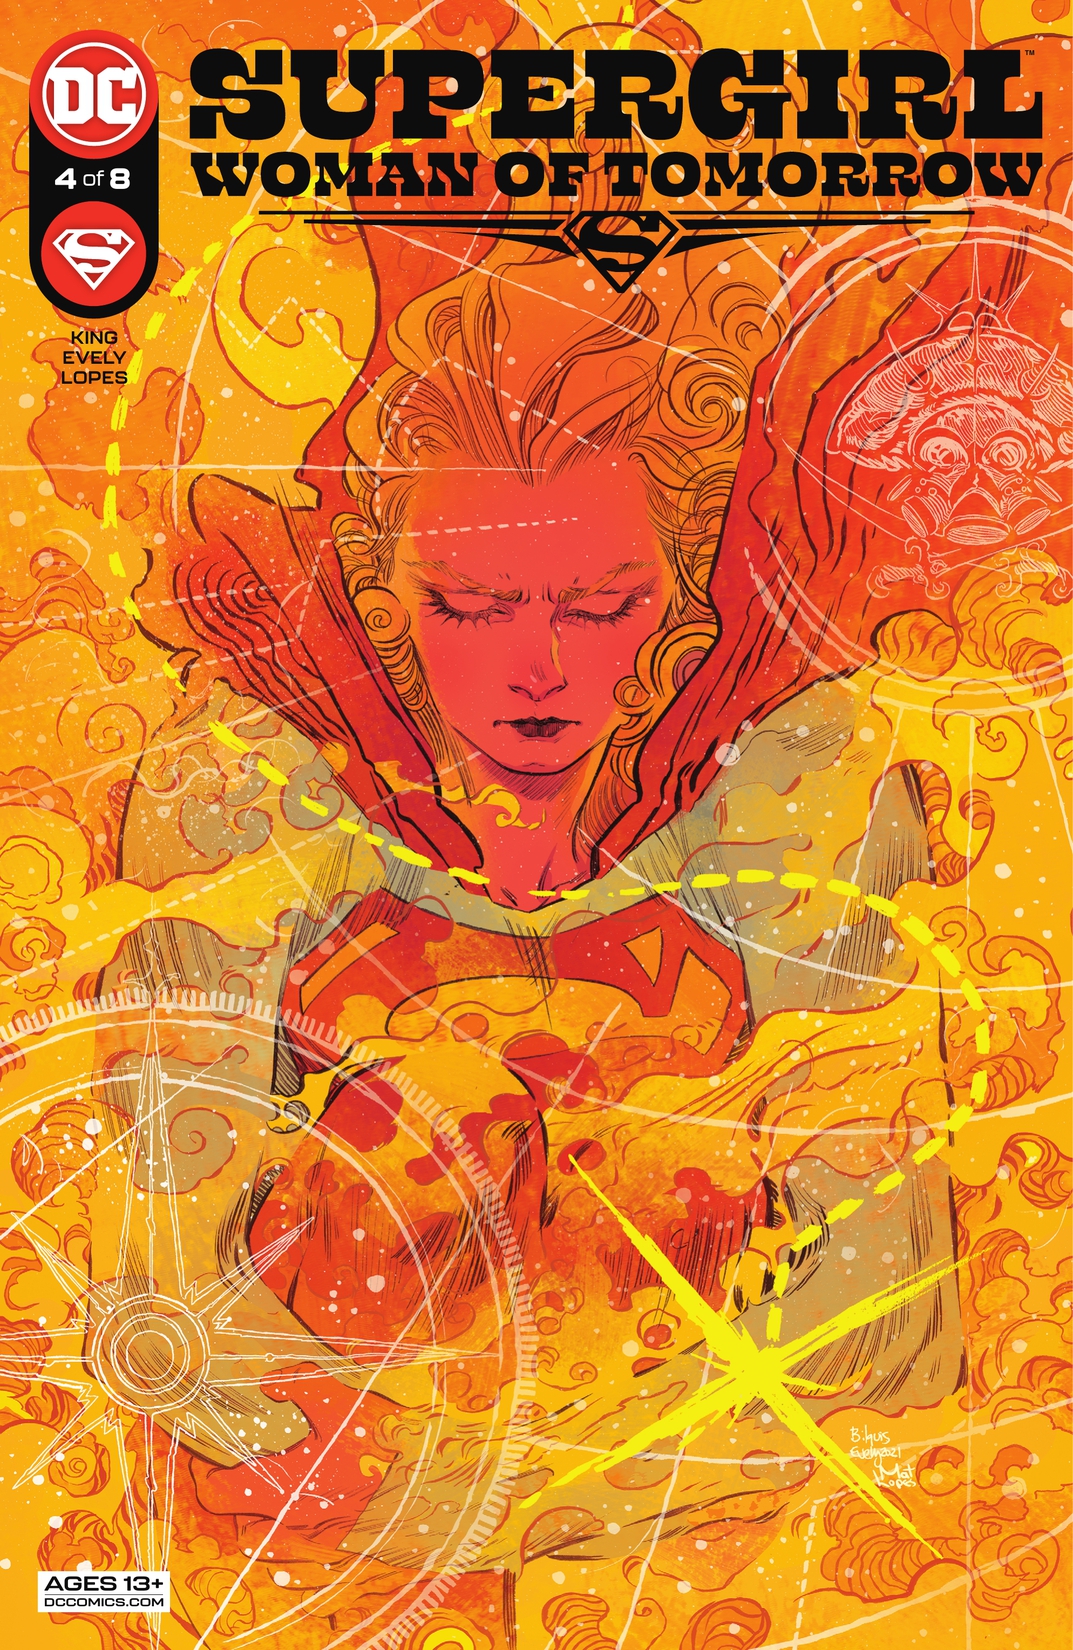 Supergirl: Woman of Tomorrow #4 preview images